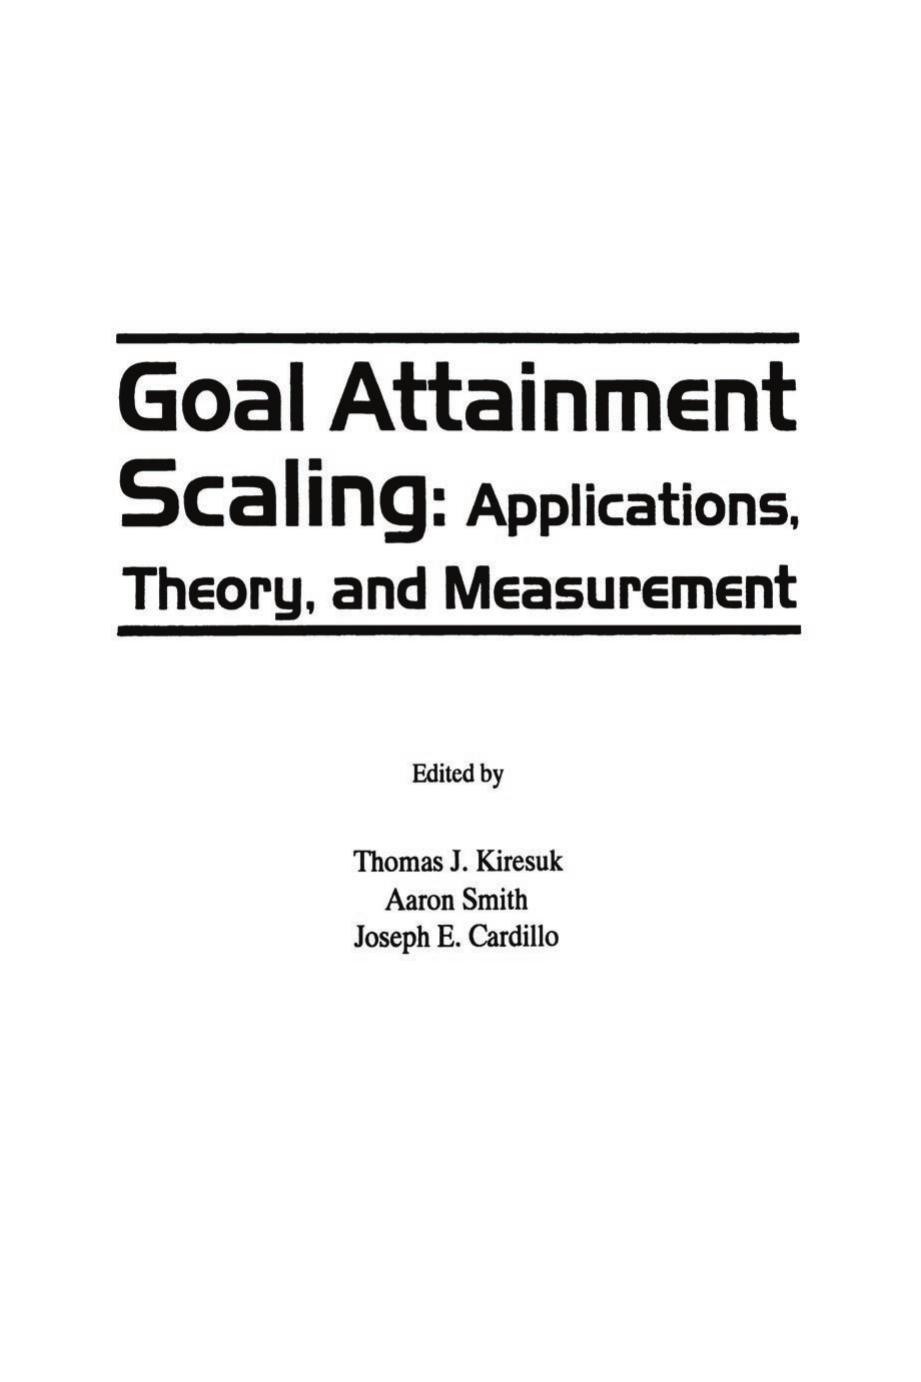 (eBook PDF)Goal Attainment Scaling: Applications, Theory, and Measurement by Thomas J. Kiresuk,Aaron Smith